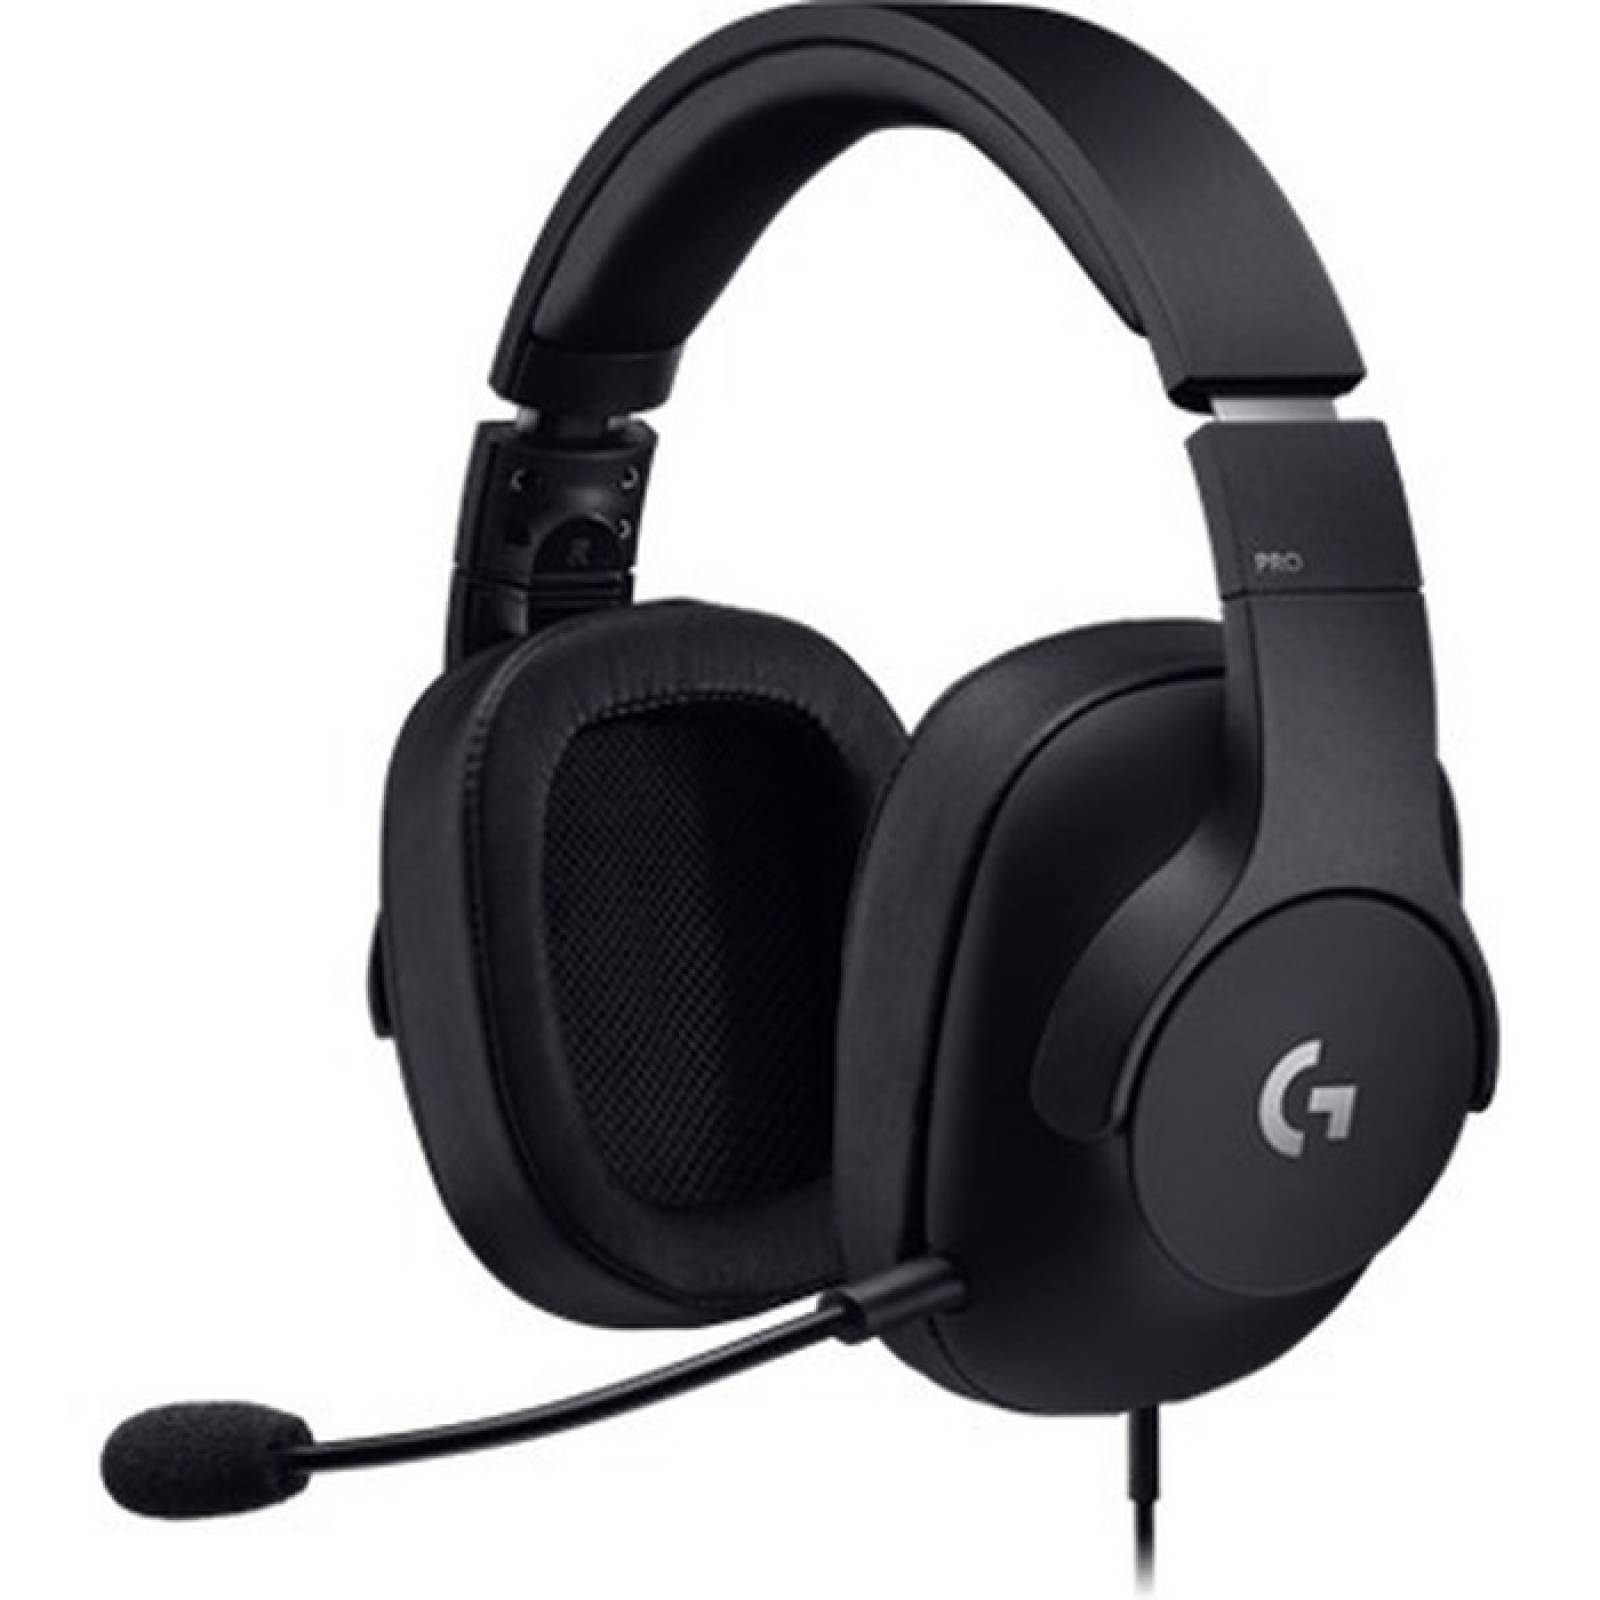 G PRO NUEVO WIRED GAMING PRO  HEADSET